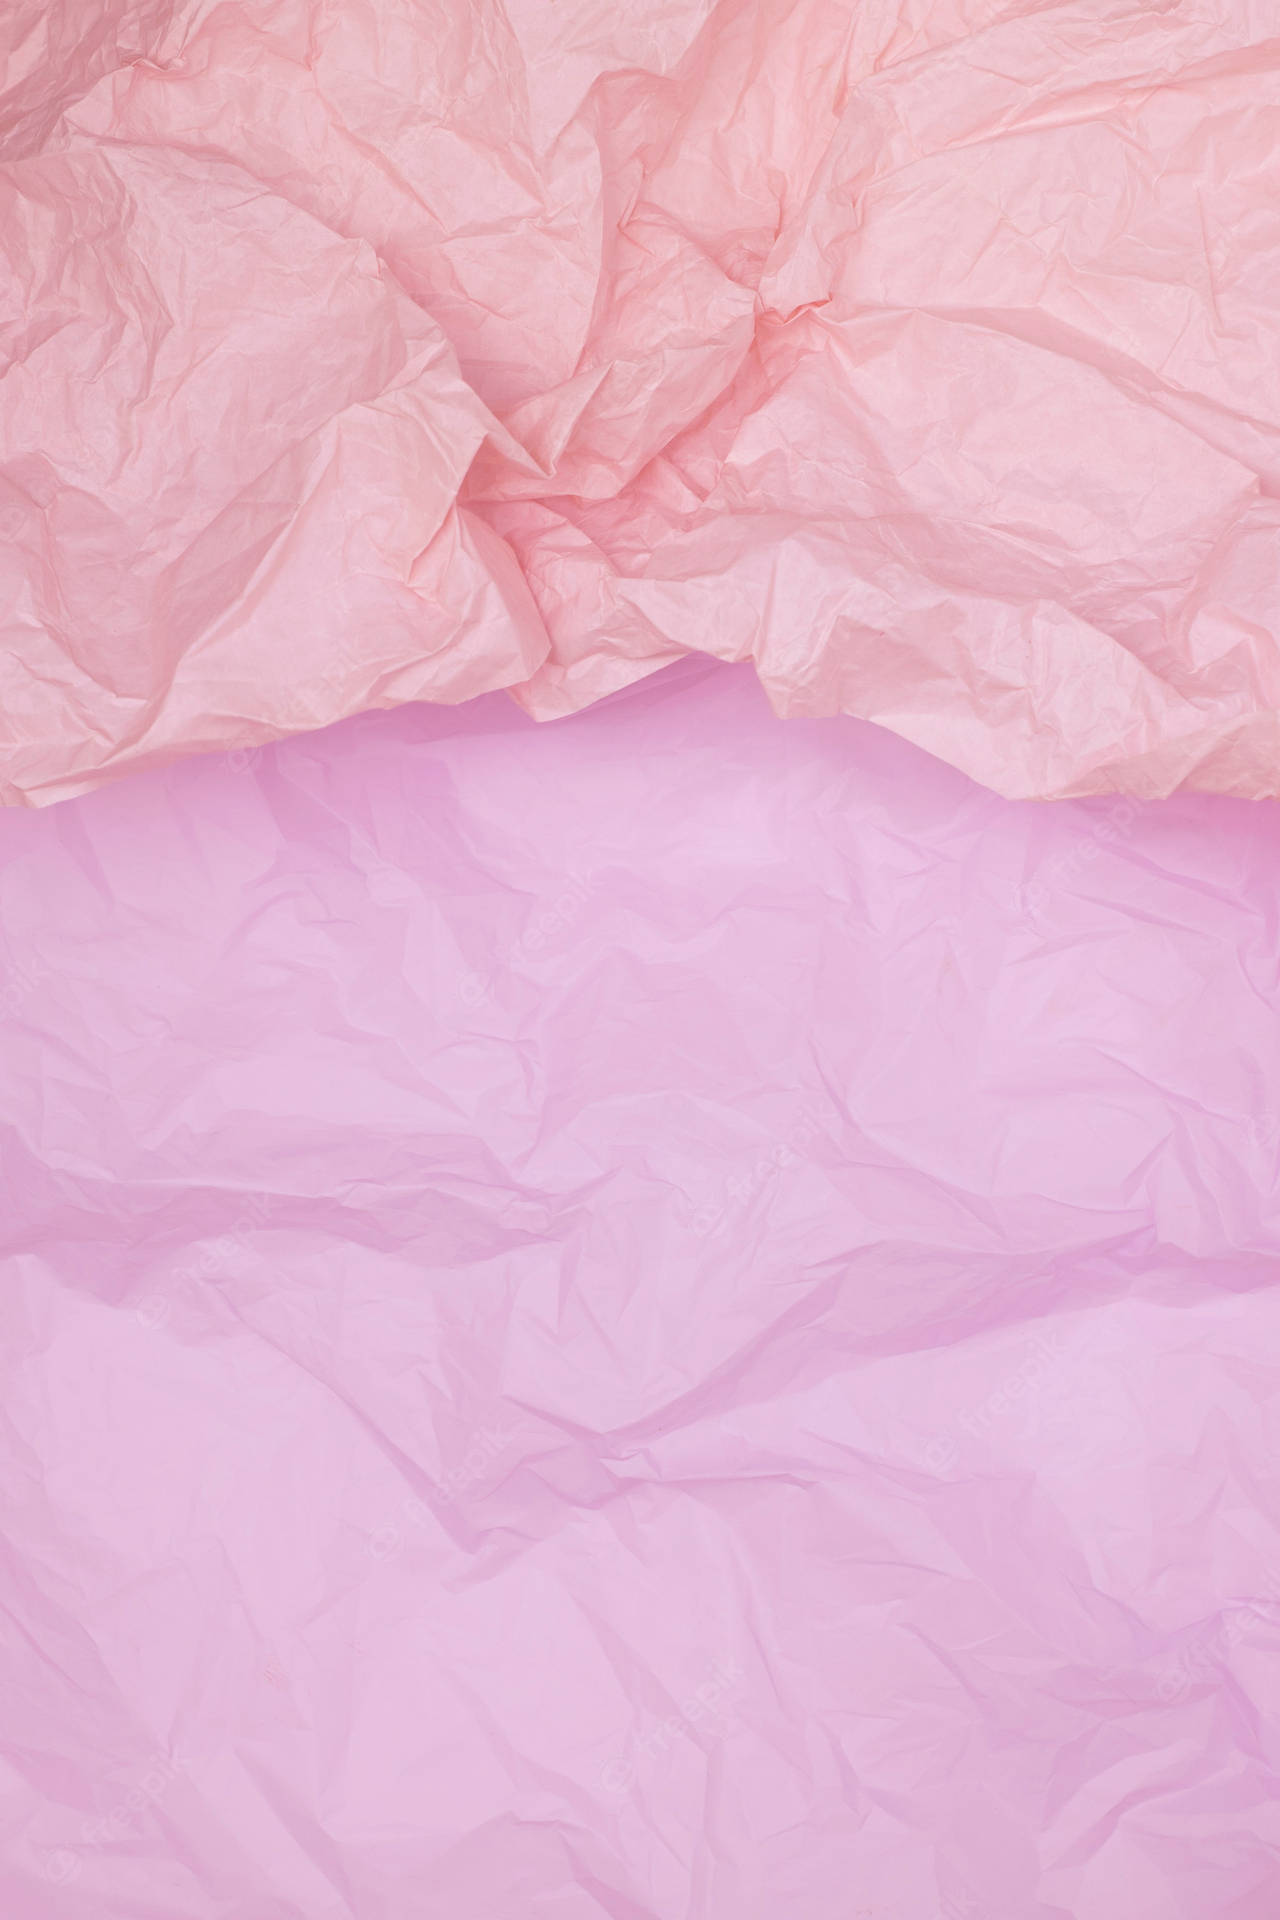 Light Pink Crumpled Paper Picture